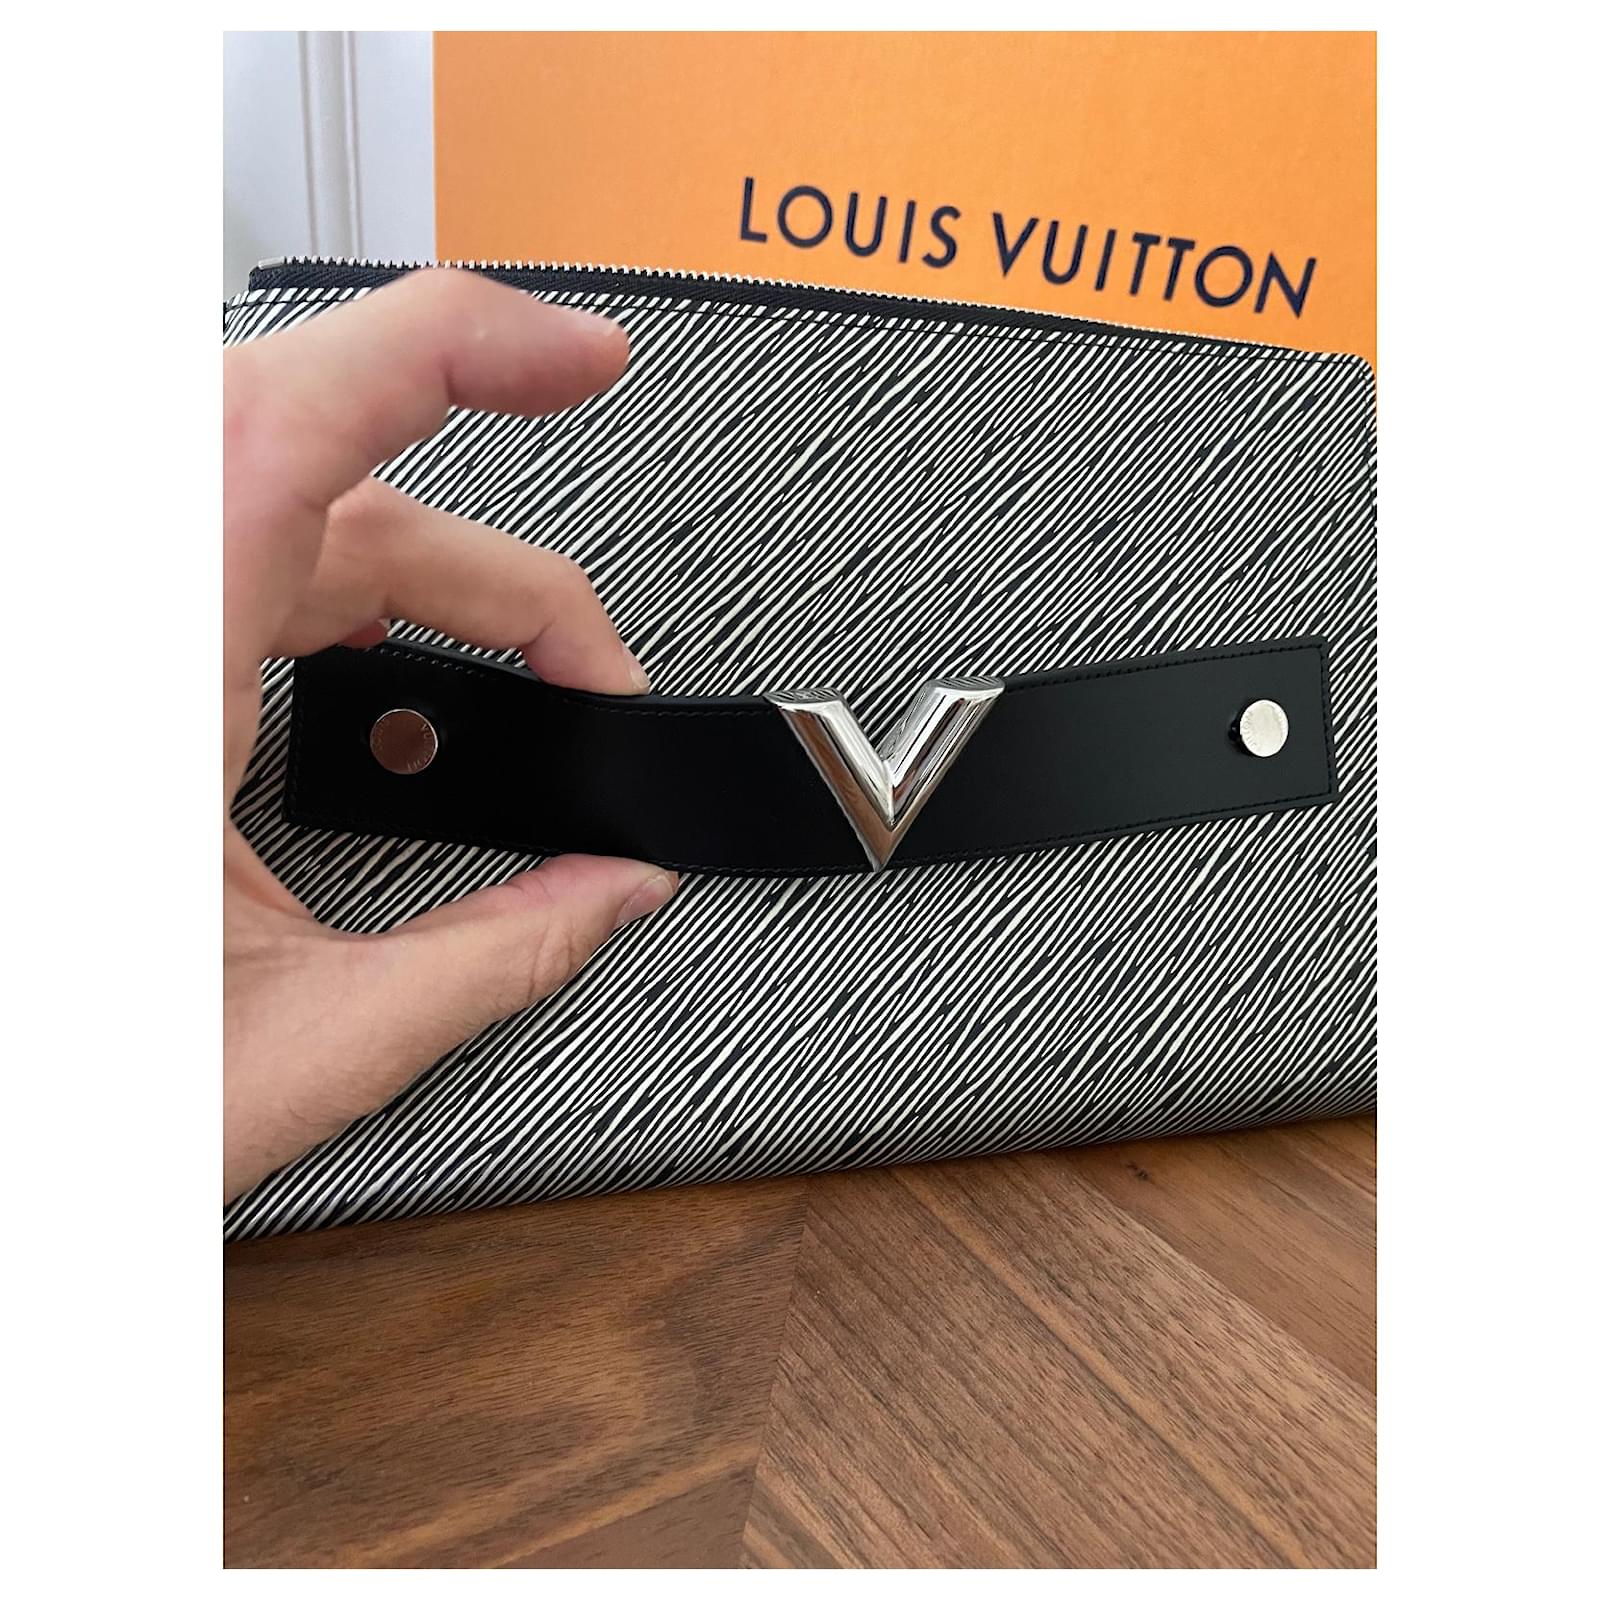 LOUIS VUITTON EPI LEATHER TWIST PINS EMBELLISHED LIMITED EDITION